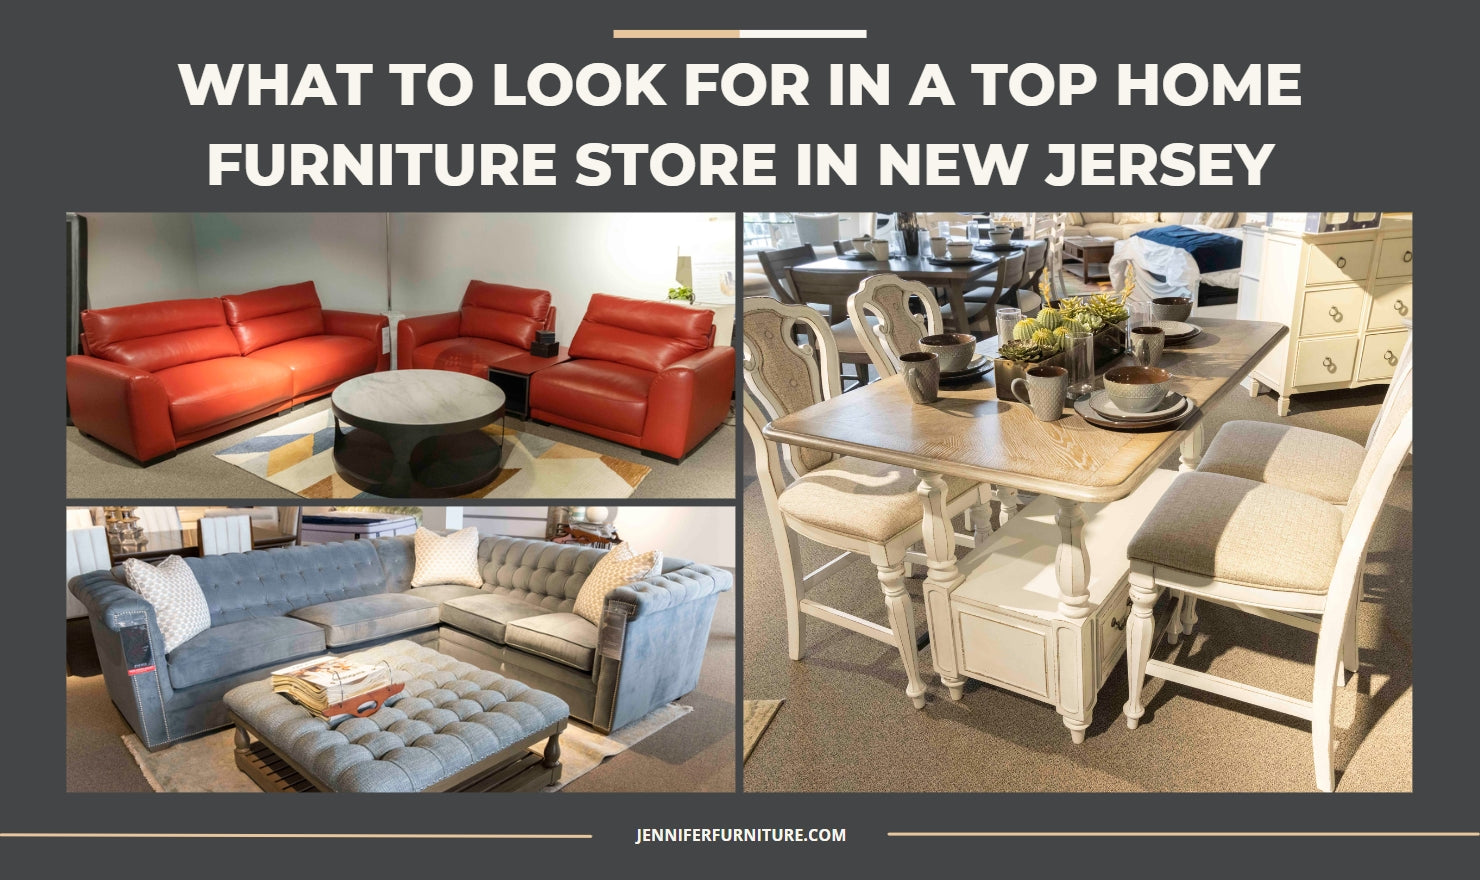 What to Look for in a Top Home Furniture Store in New Jersey